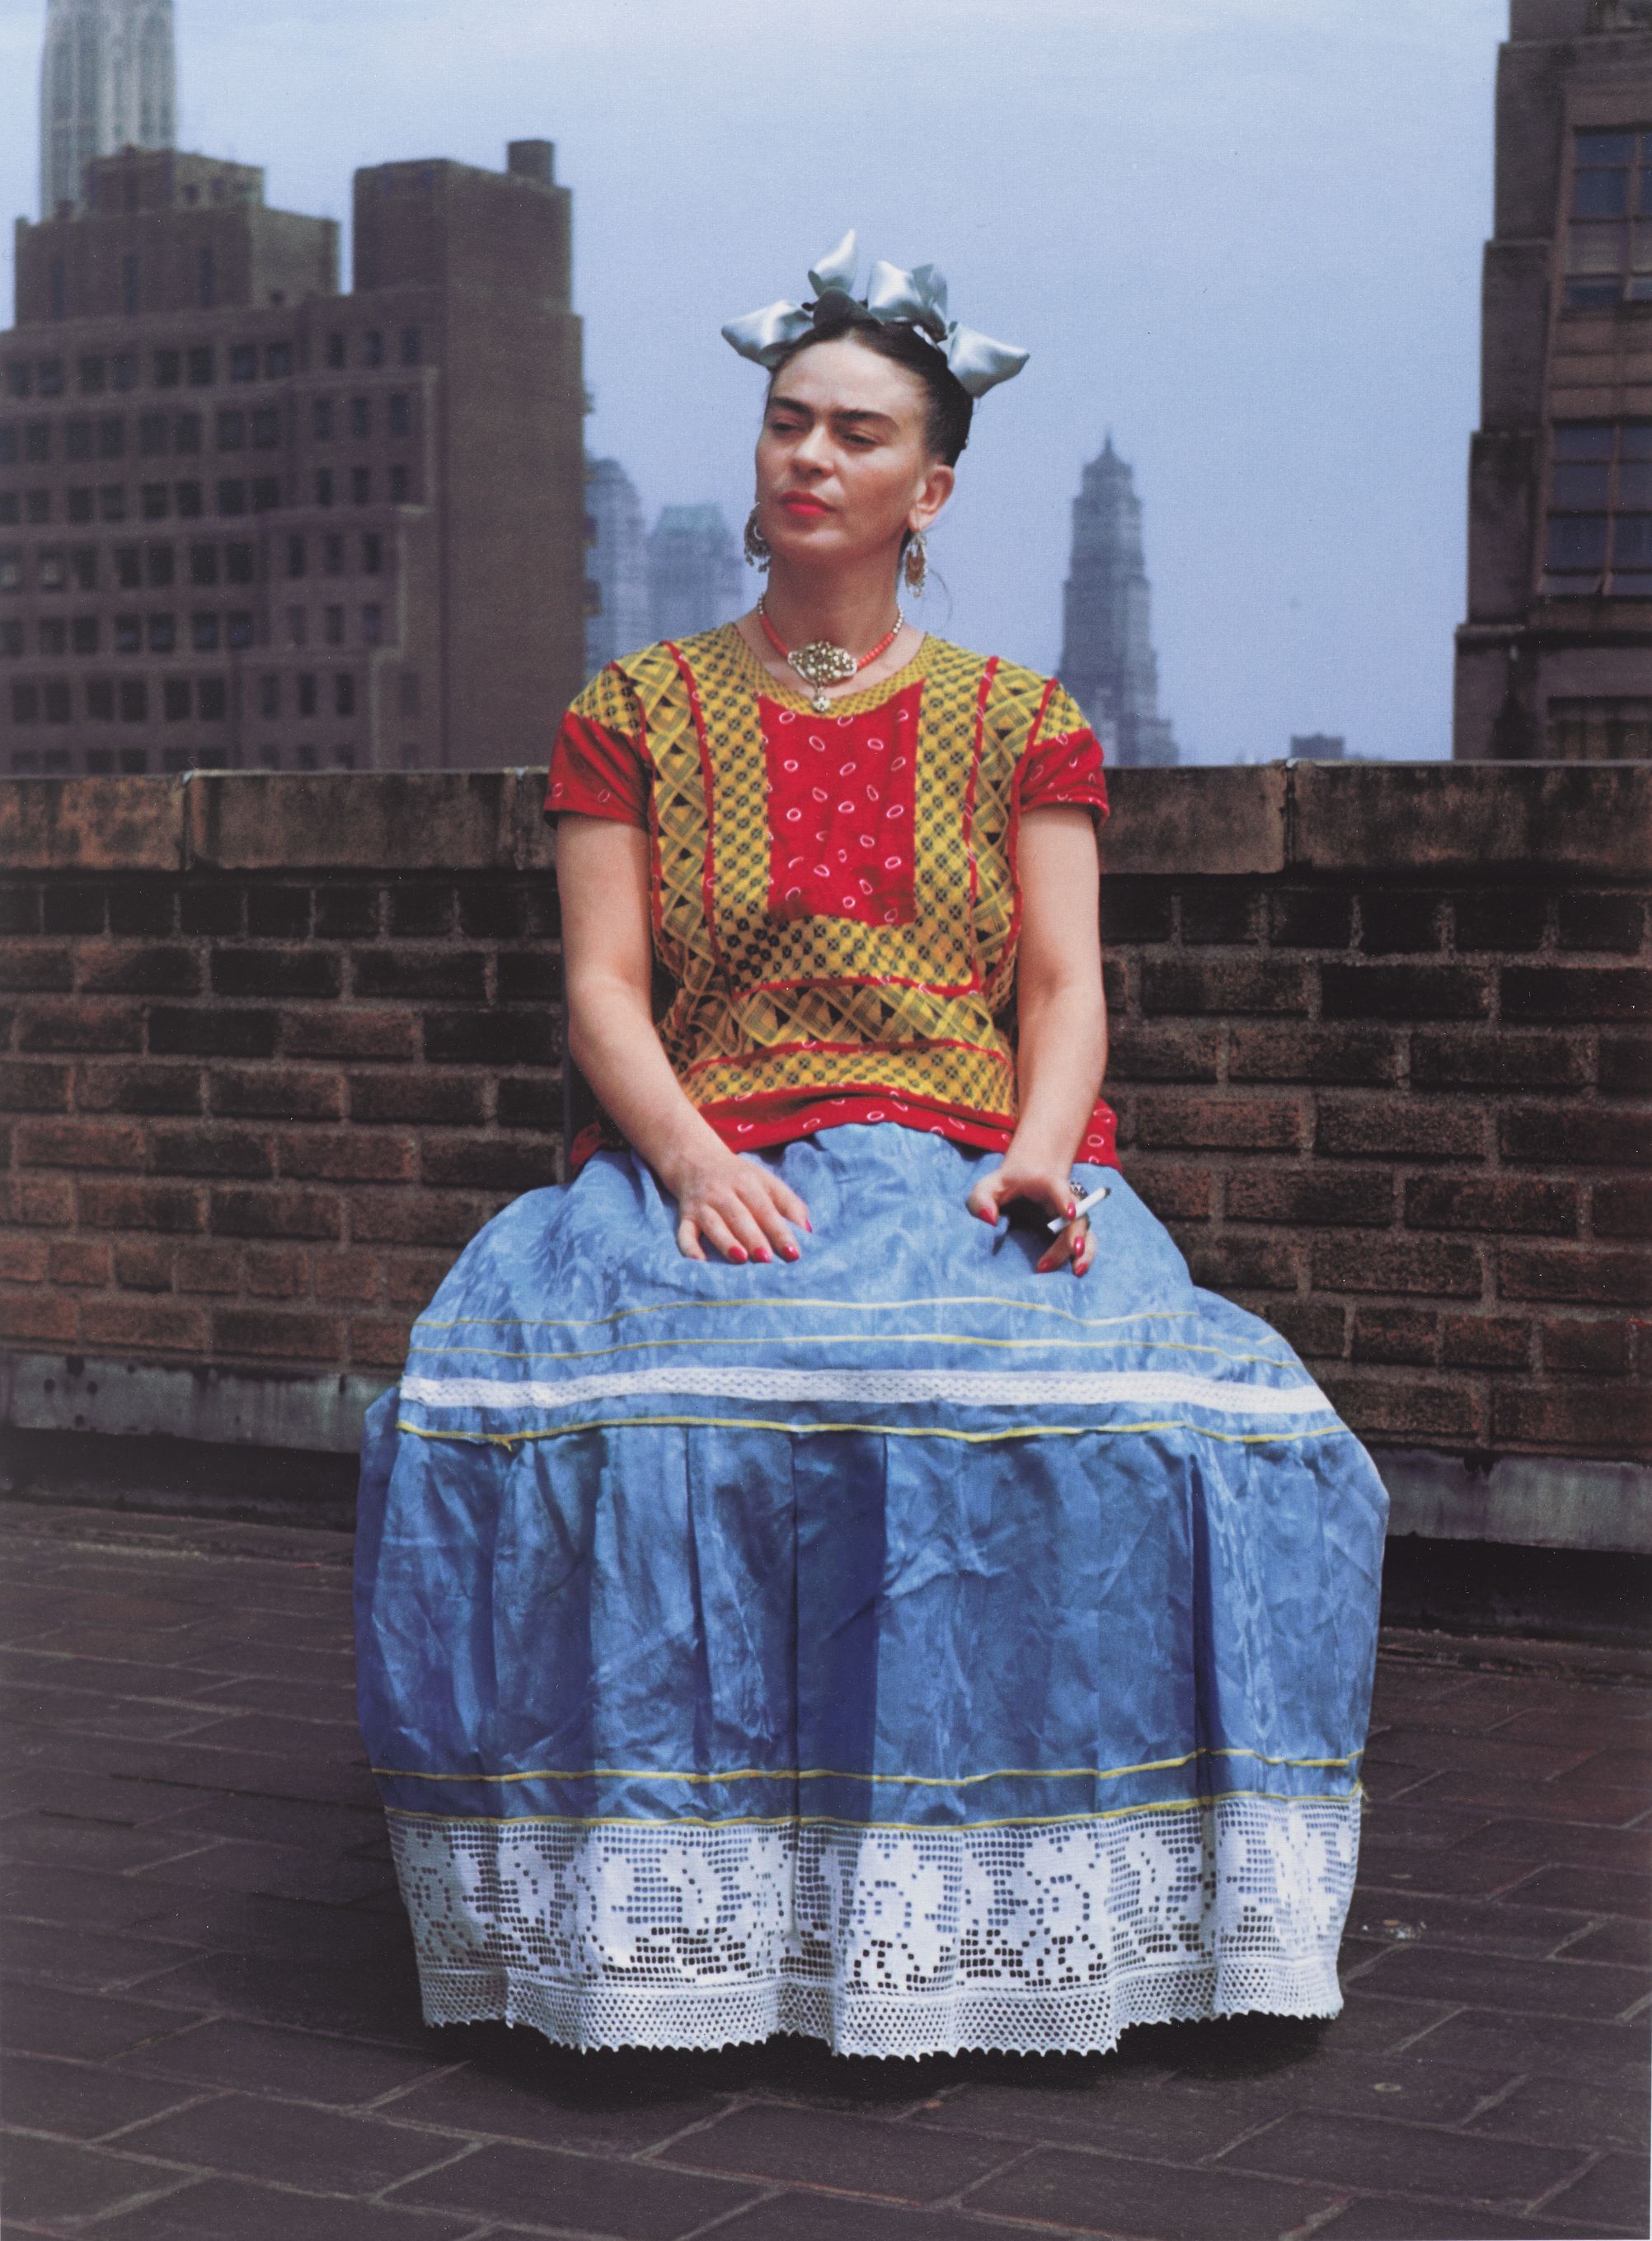 https://d1lfxha3ugu3d4.cloudfront.net/exhibitions/images/Frida_Kahlo_Appearances_Can_Be_Deceiving_2010.80_Nickolas_Muray_Frida_in_New_York_Large_JPEG_2004w.jpg